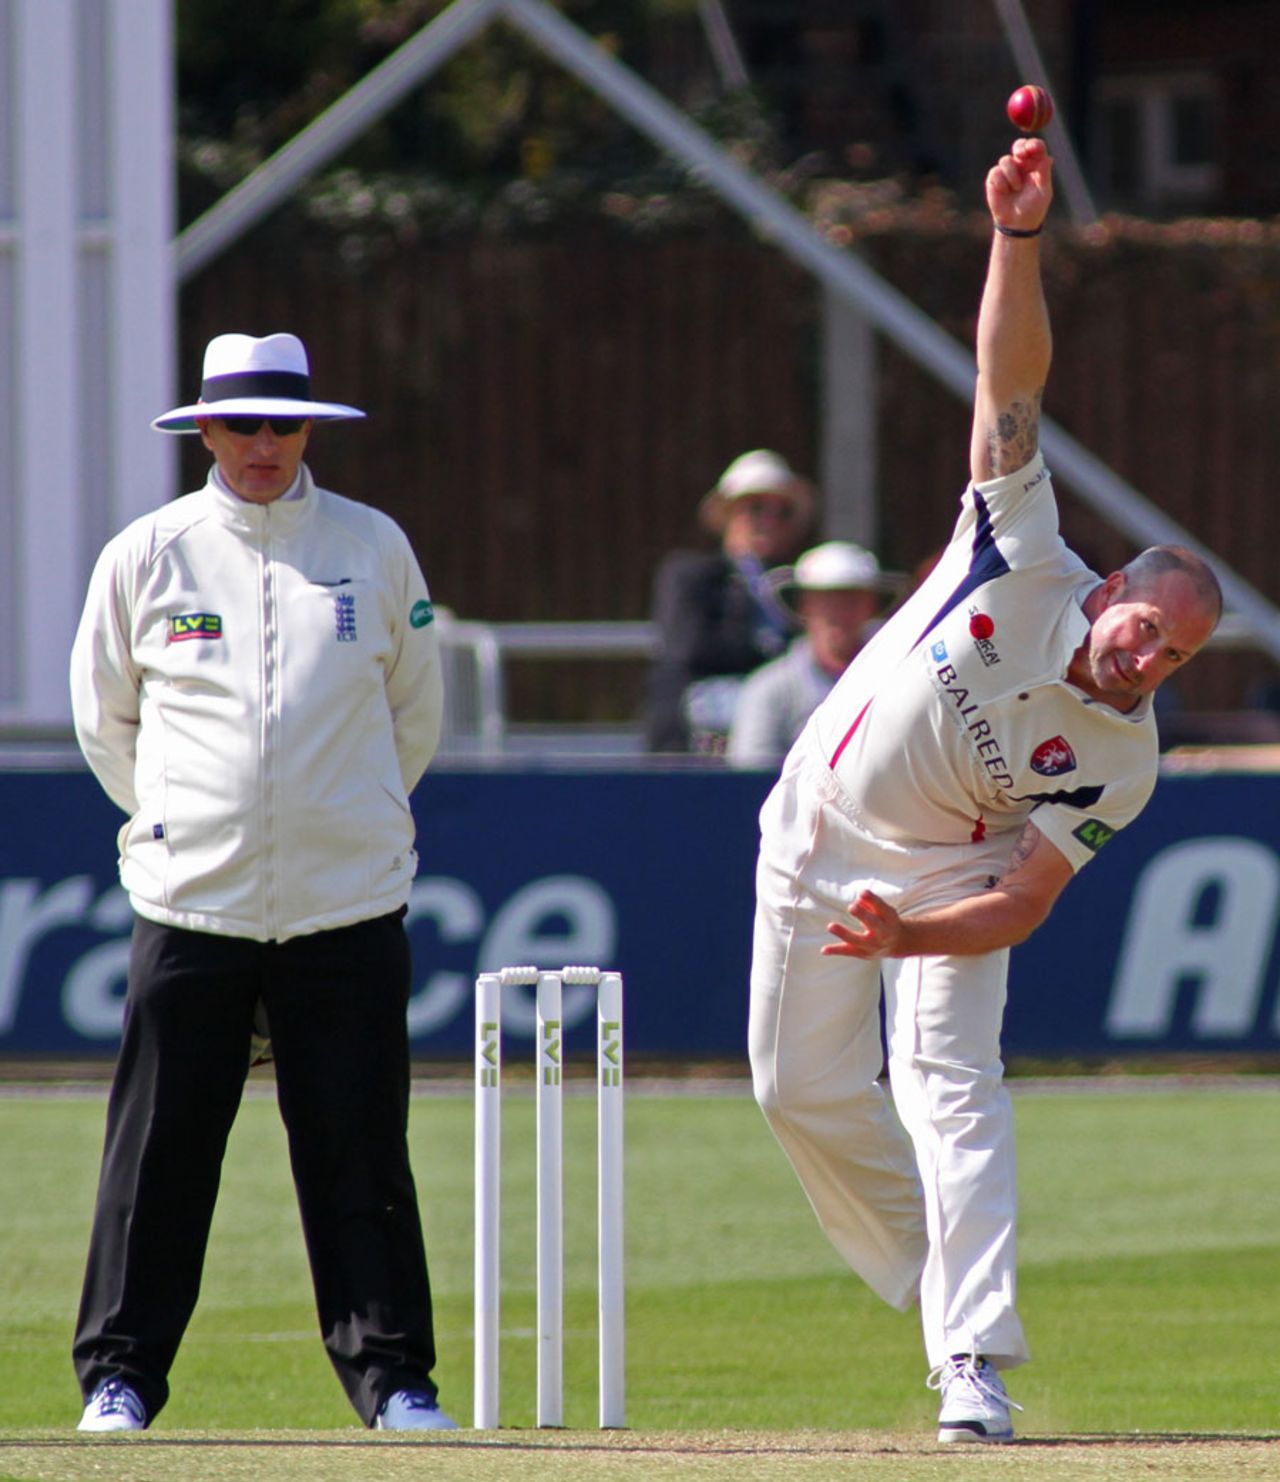 Darren Stevens runs into bowl, Essex v Kent, County Championship Division Two, Chelmsford, 2nd day, April 20, 2015